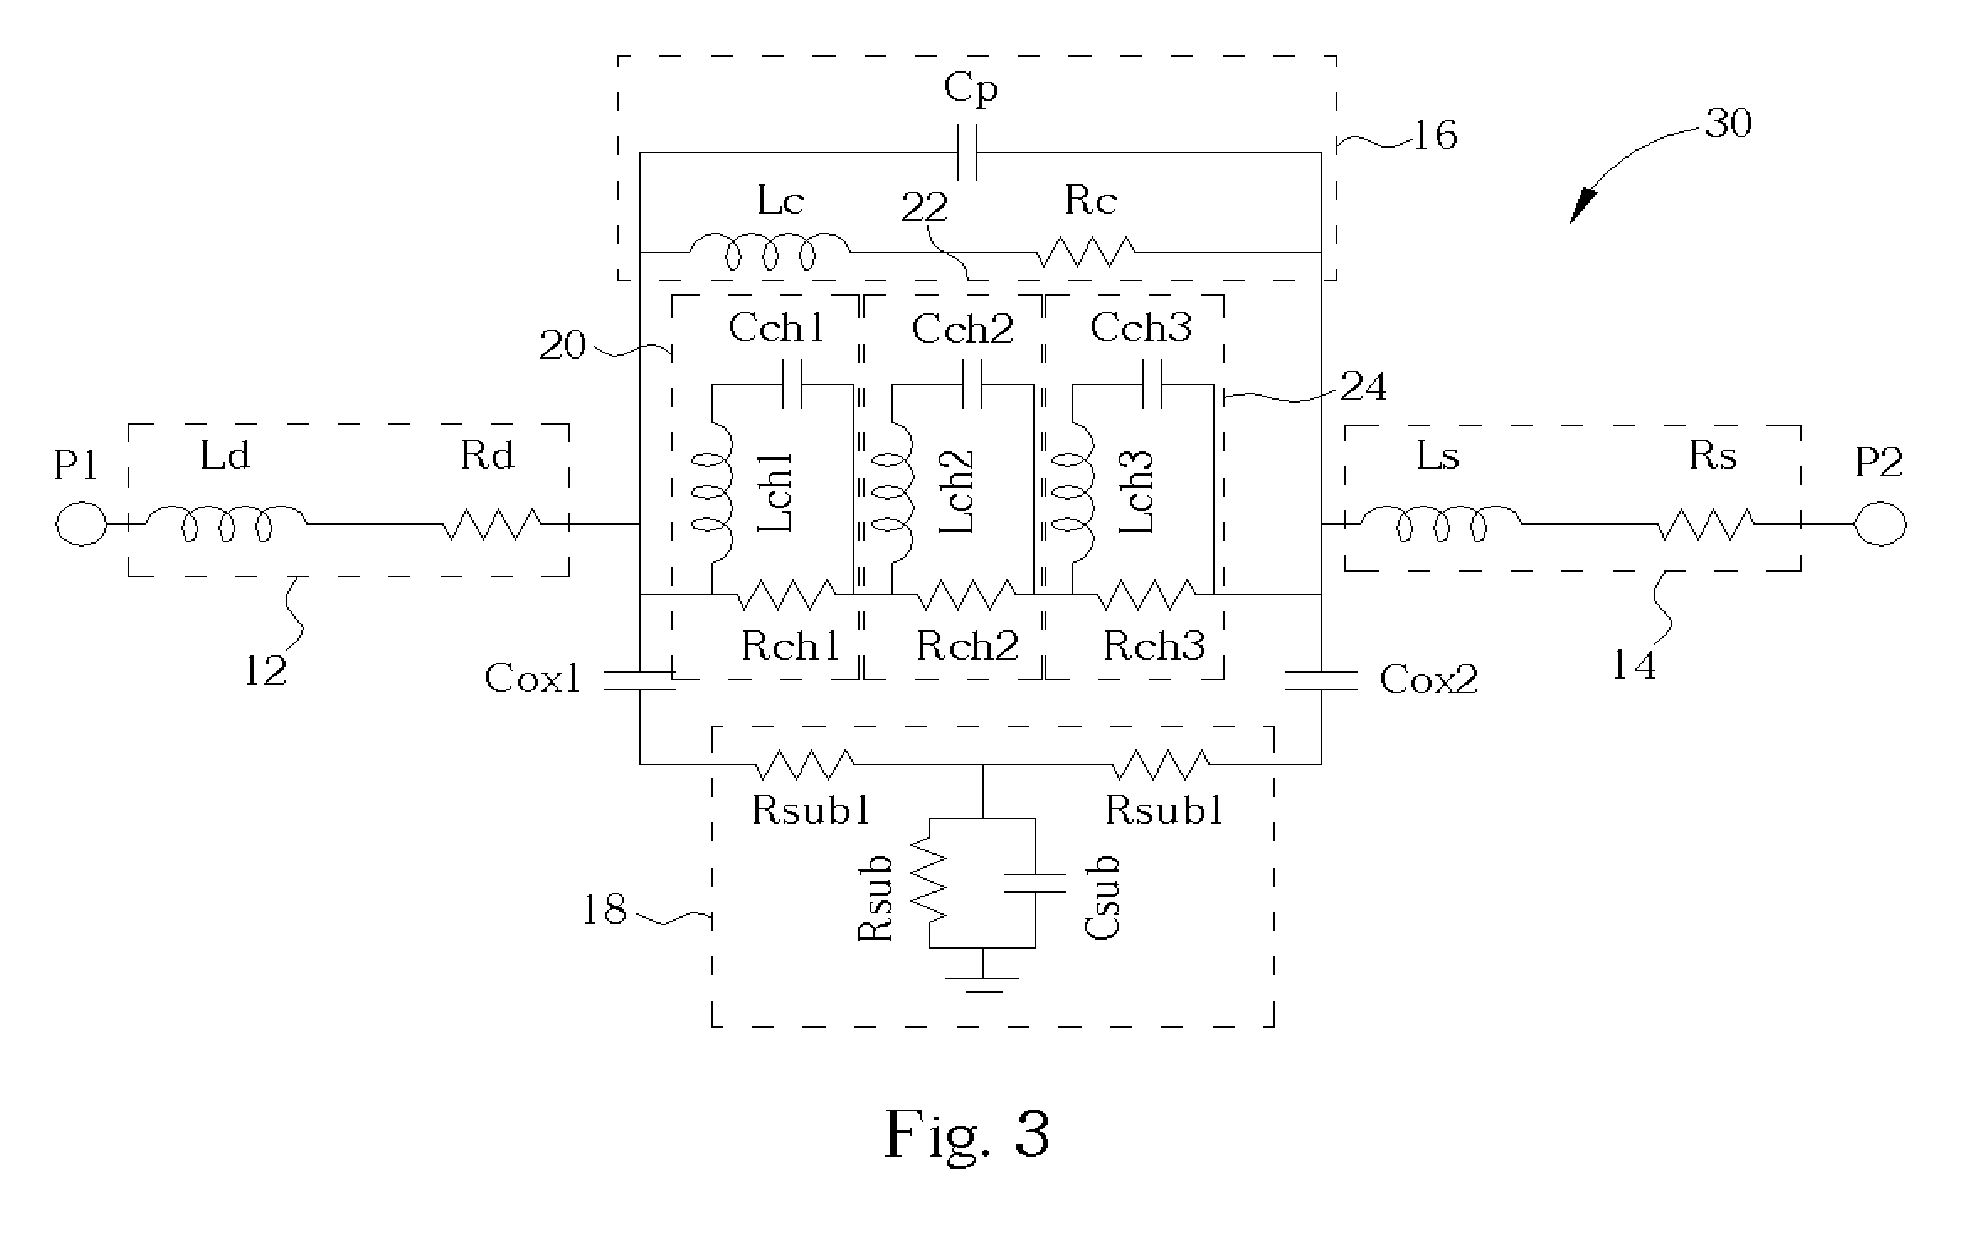 Equivalent circuits and simulation method for an RF switch